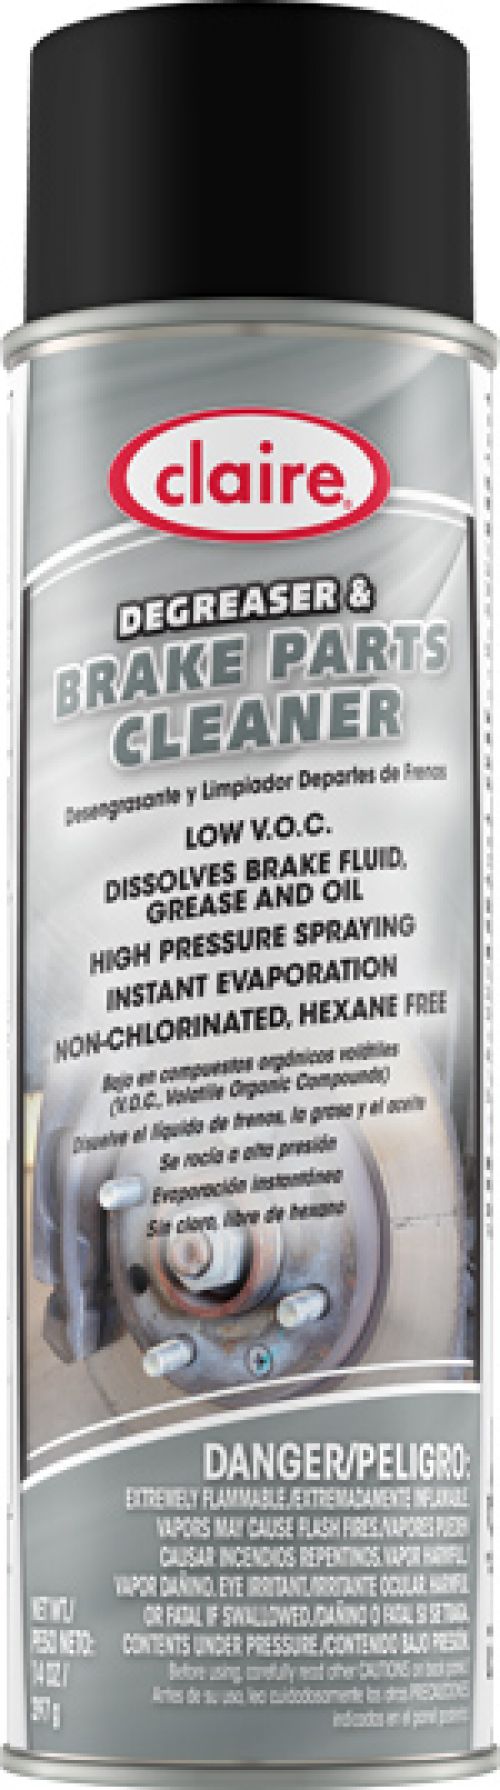 Degreaser And Brake Parts Cleaner